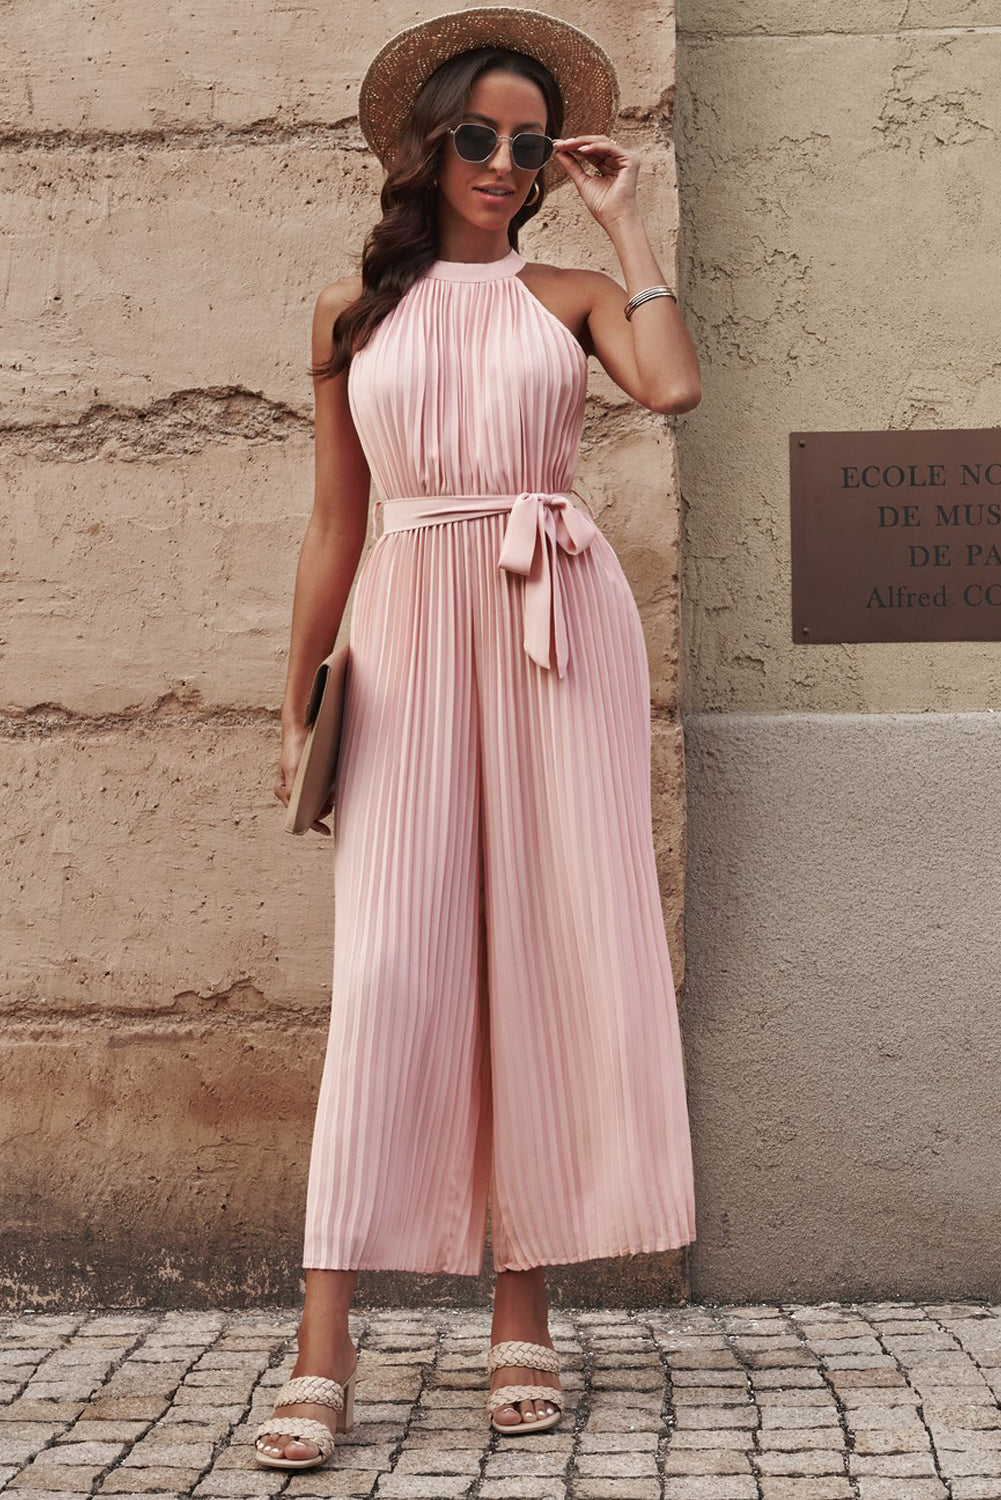 Rome Accordion Pleated Belted Grecian Neck Sleeveless Jumpsuit